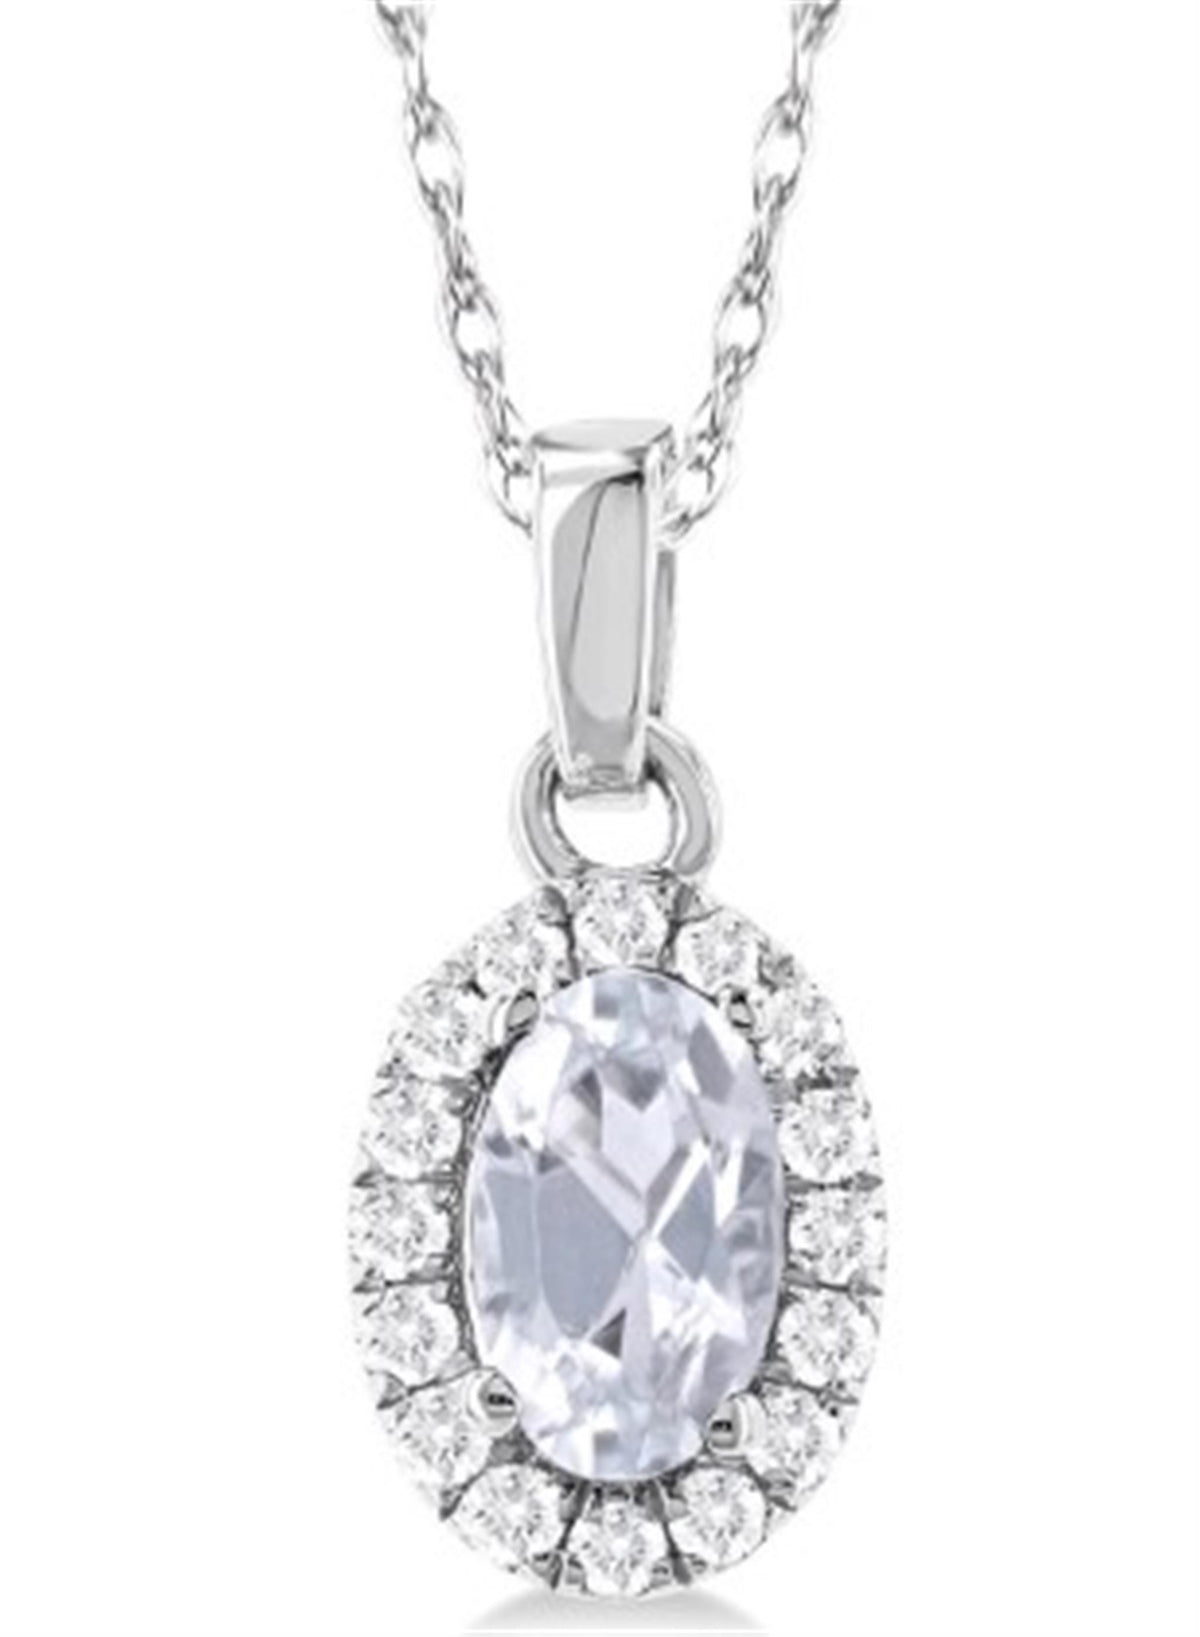 10Kt White Gold Center Of My World Halo Pendant With Topaz and Natural Diamonds